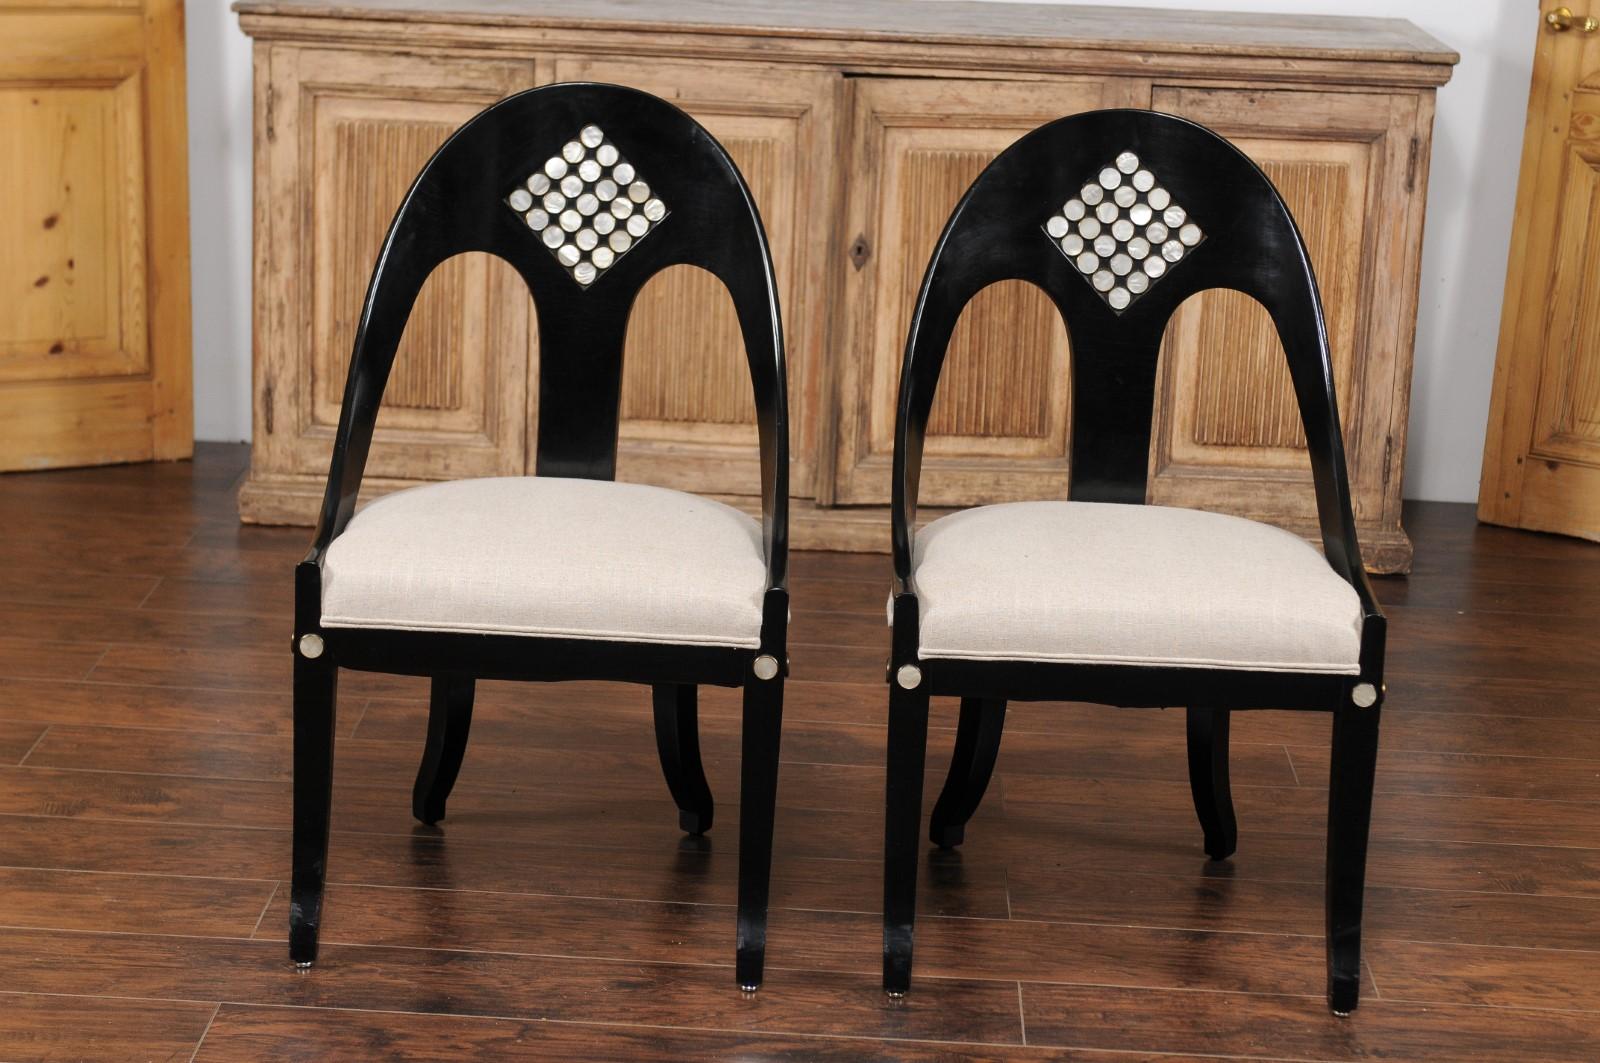 Pair of Vintage 1950s Ebonized Wood Spoon Back Chairs with Mother-of-pearl Inlay 5